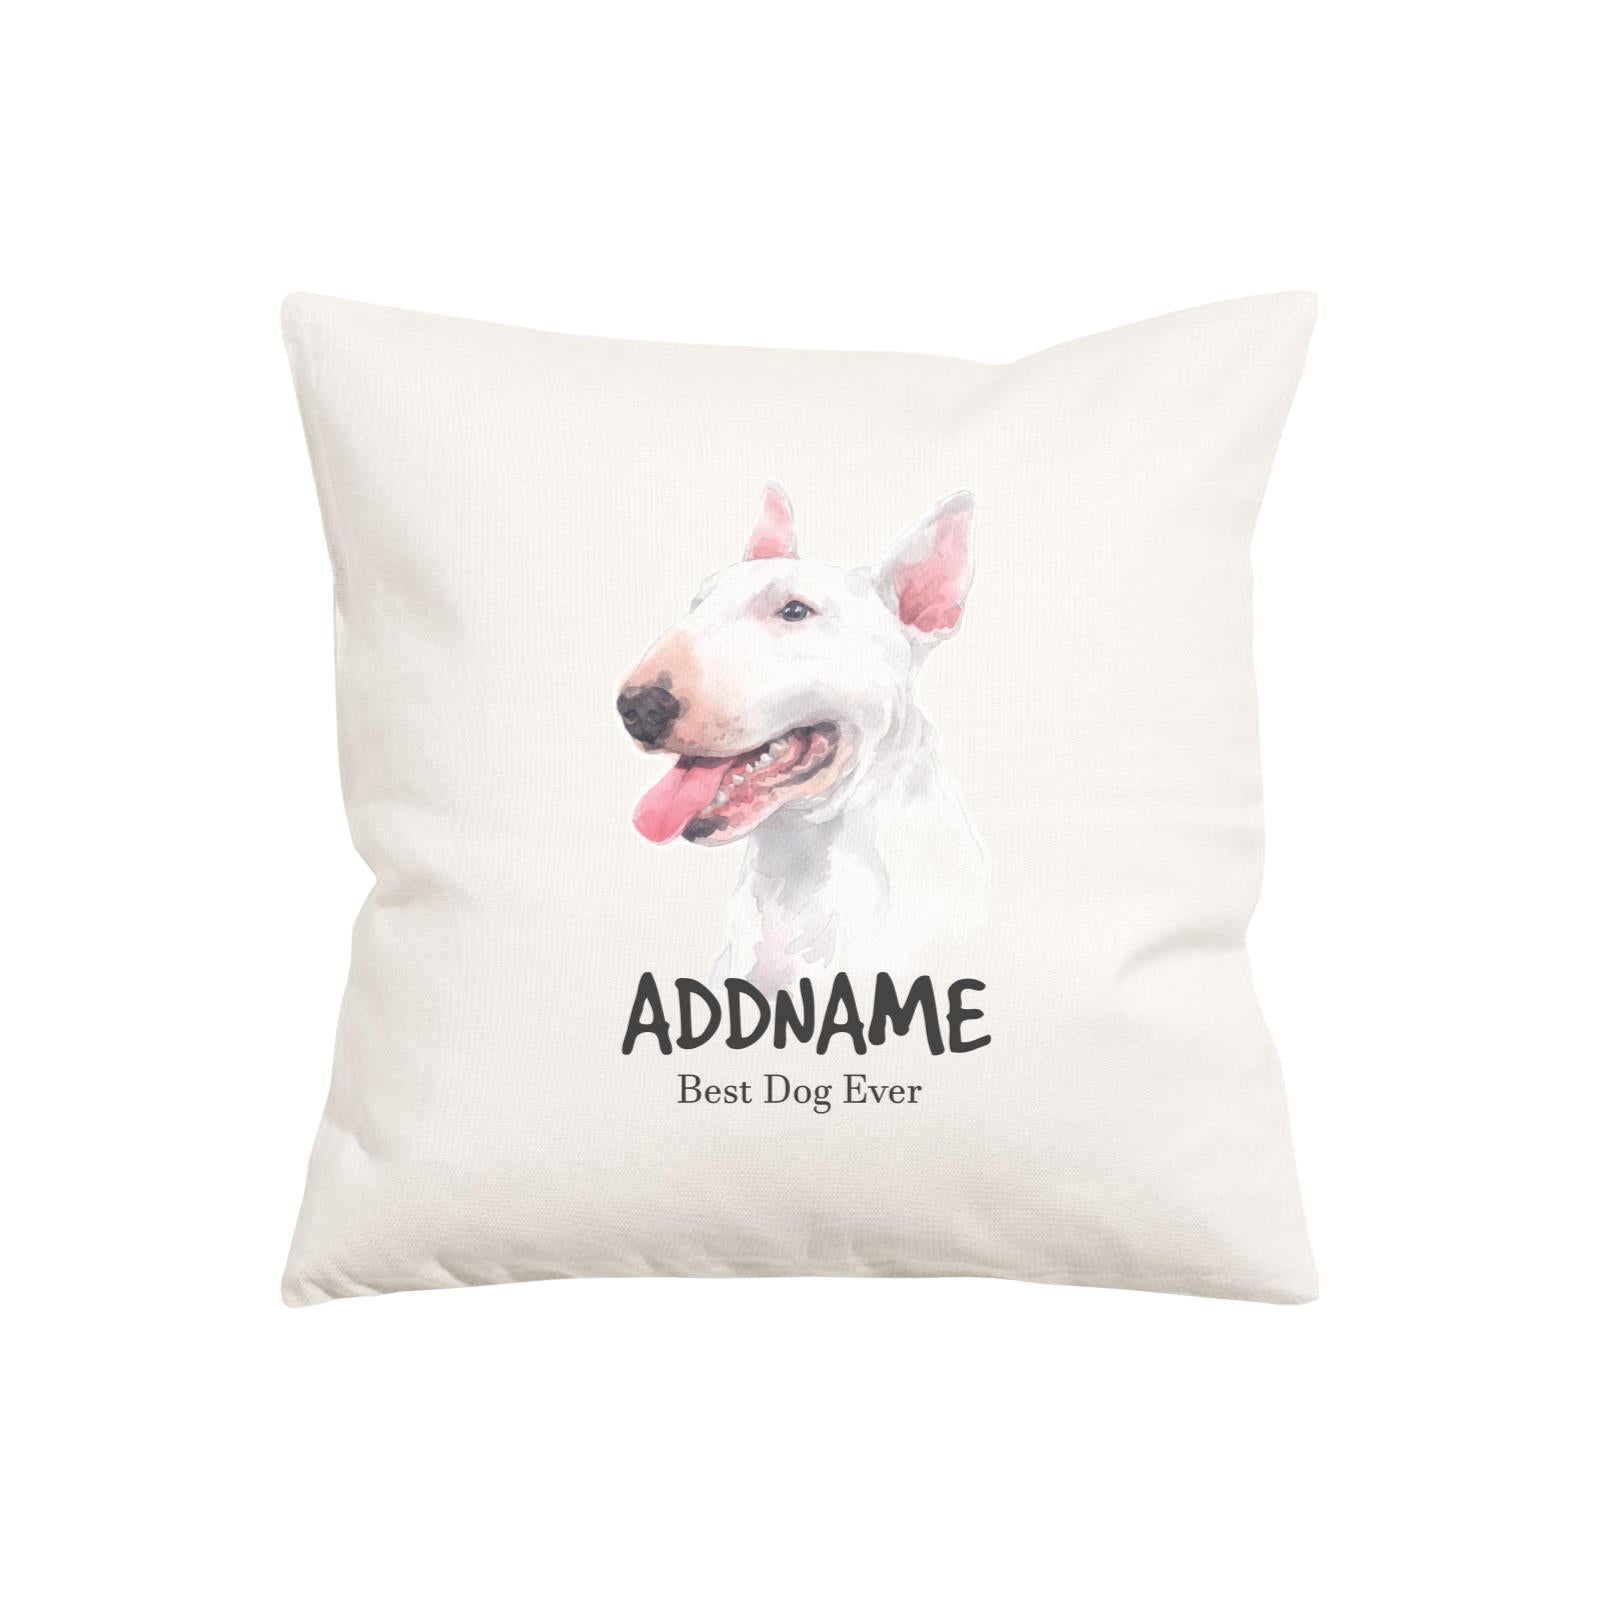 Watercolor Dog Series Bull Terrier Best Dog Ever Addname Pillow Cushion